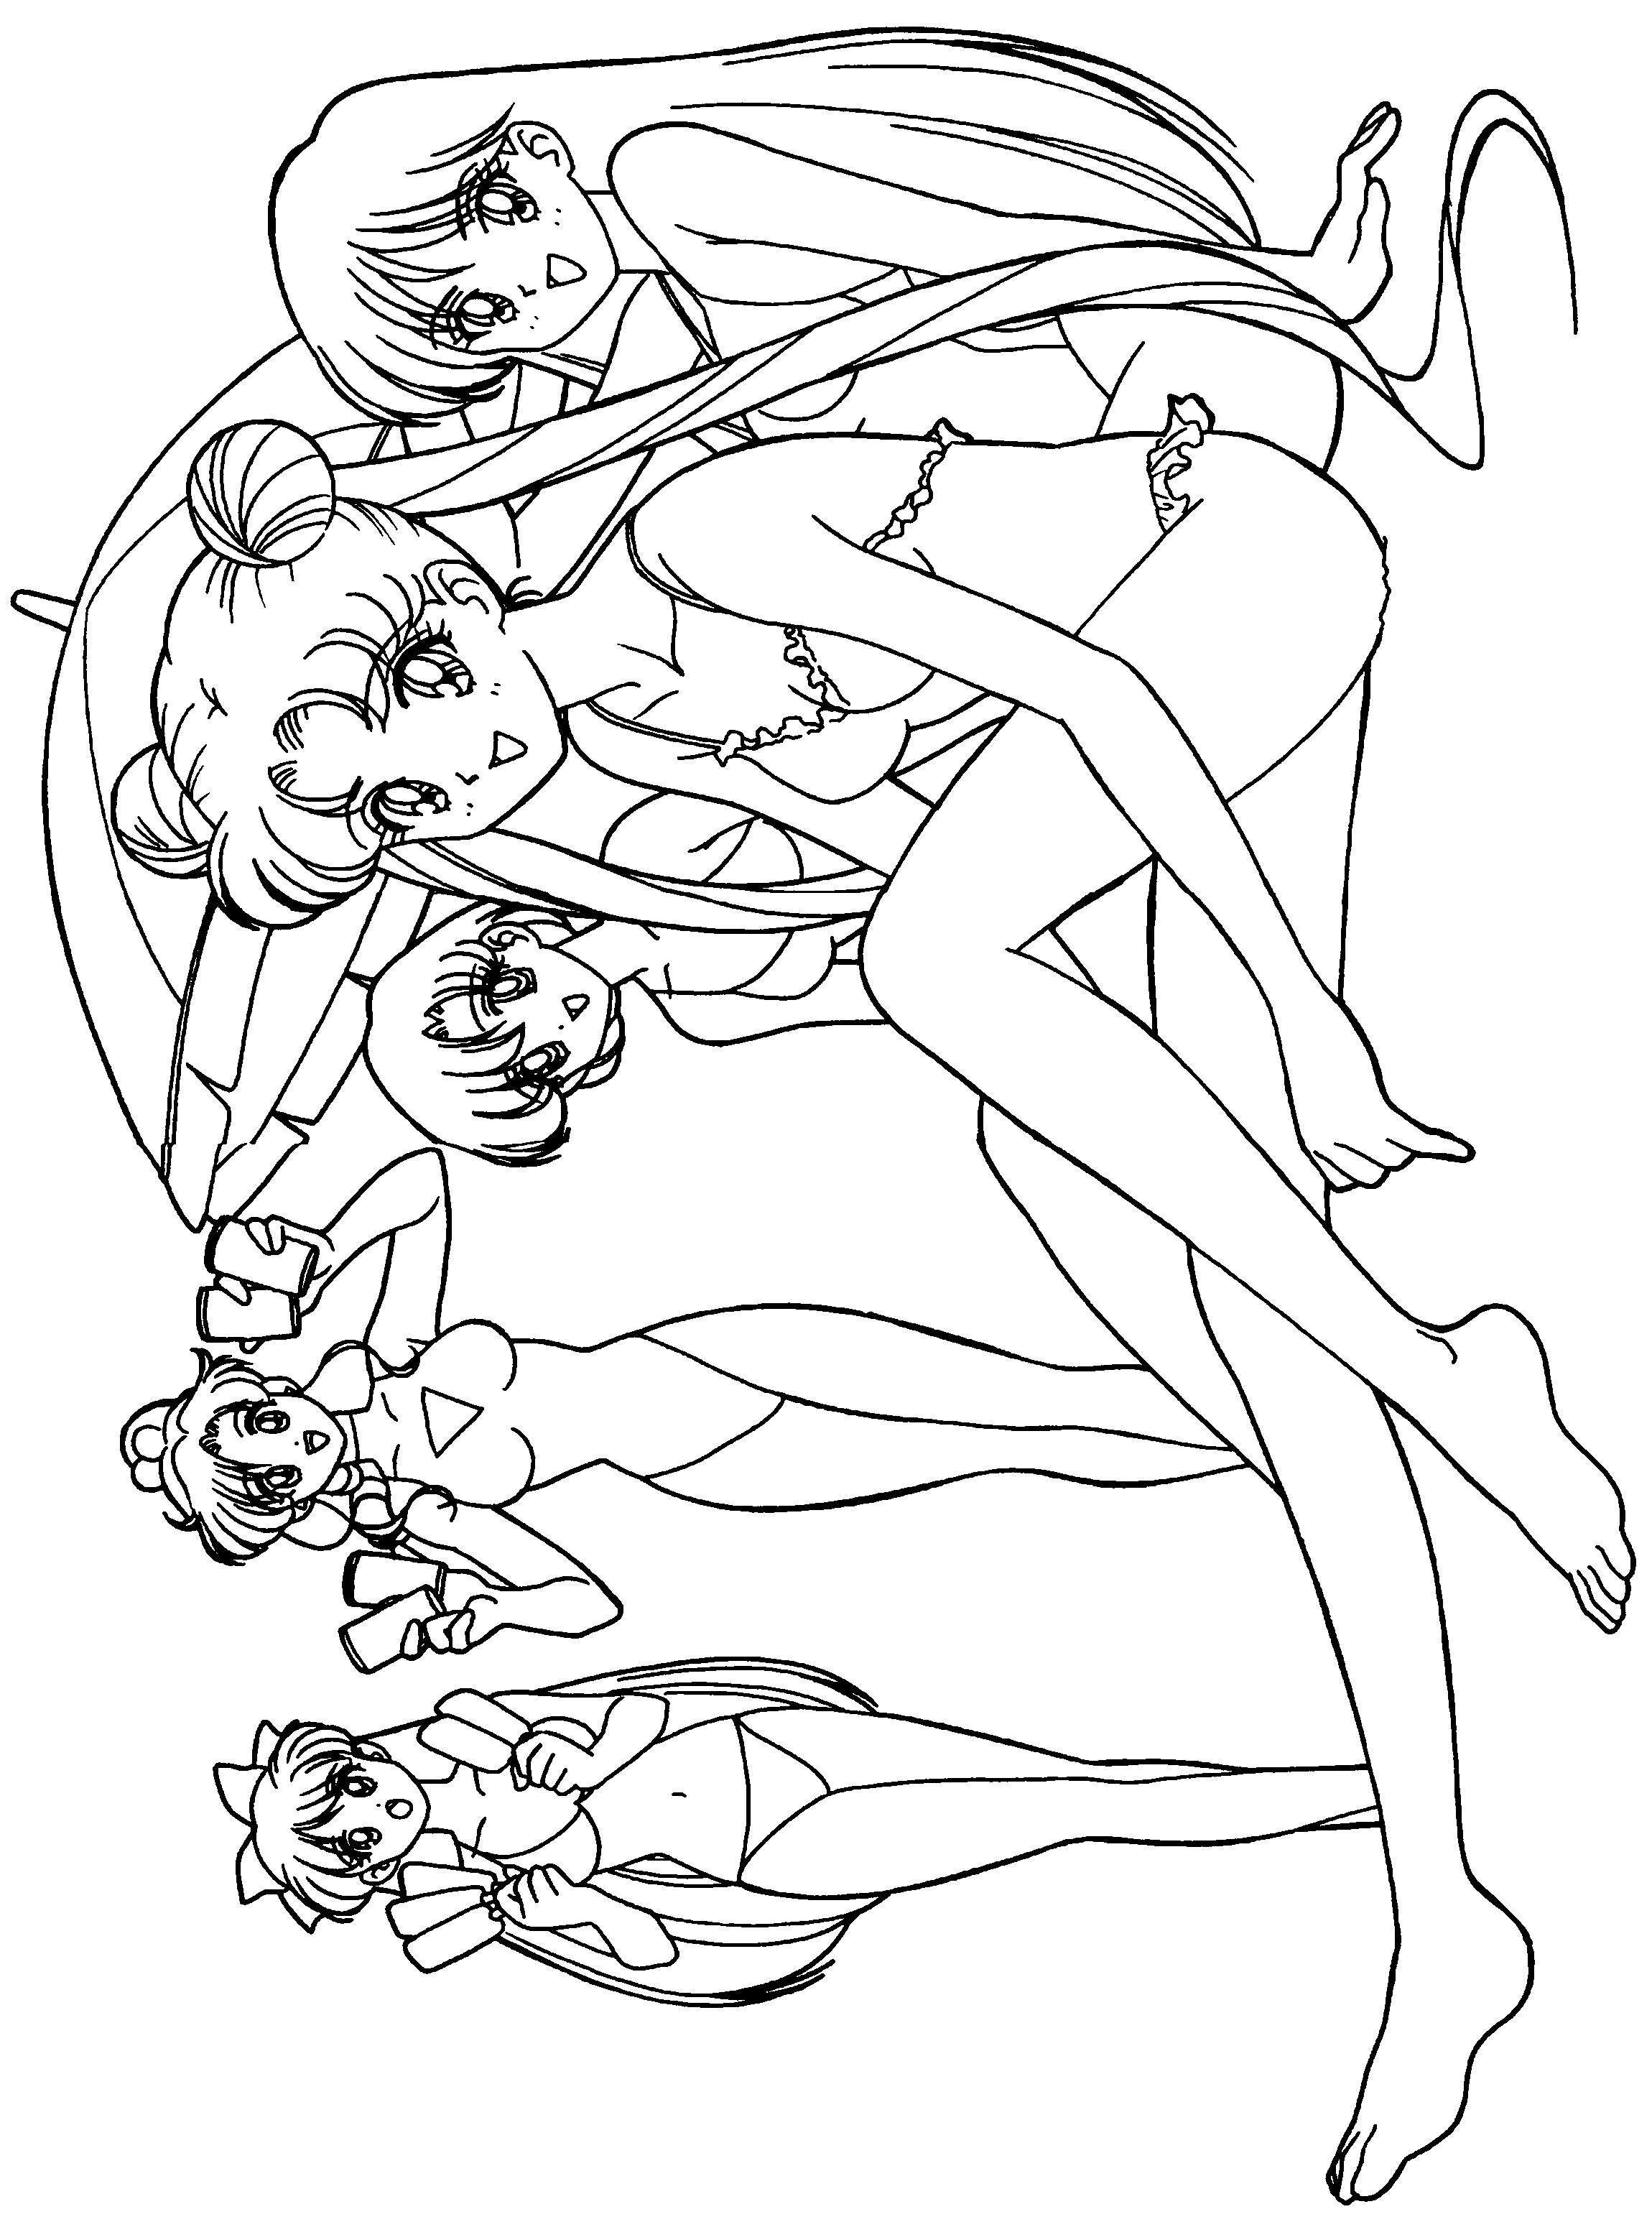 sailor moon all sailor scouts coloring pages - photo #31